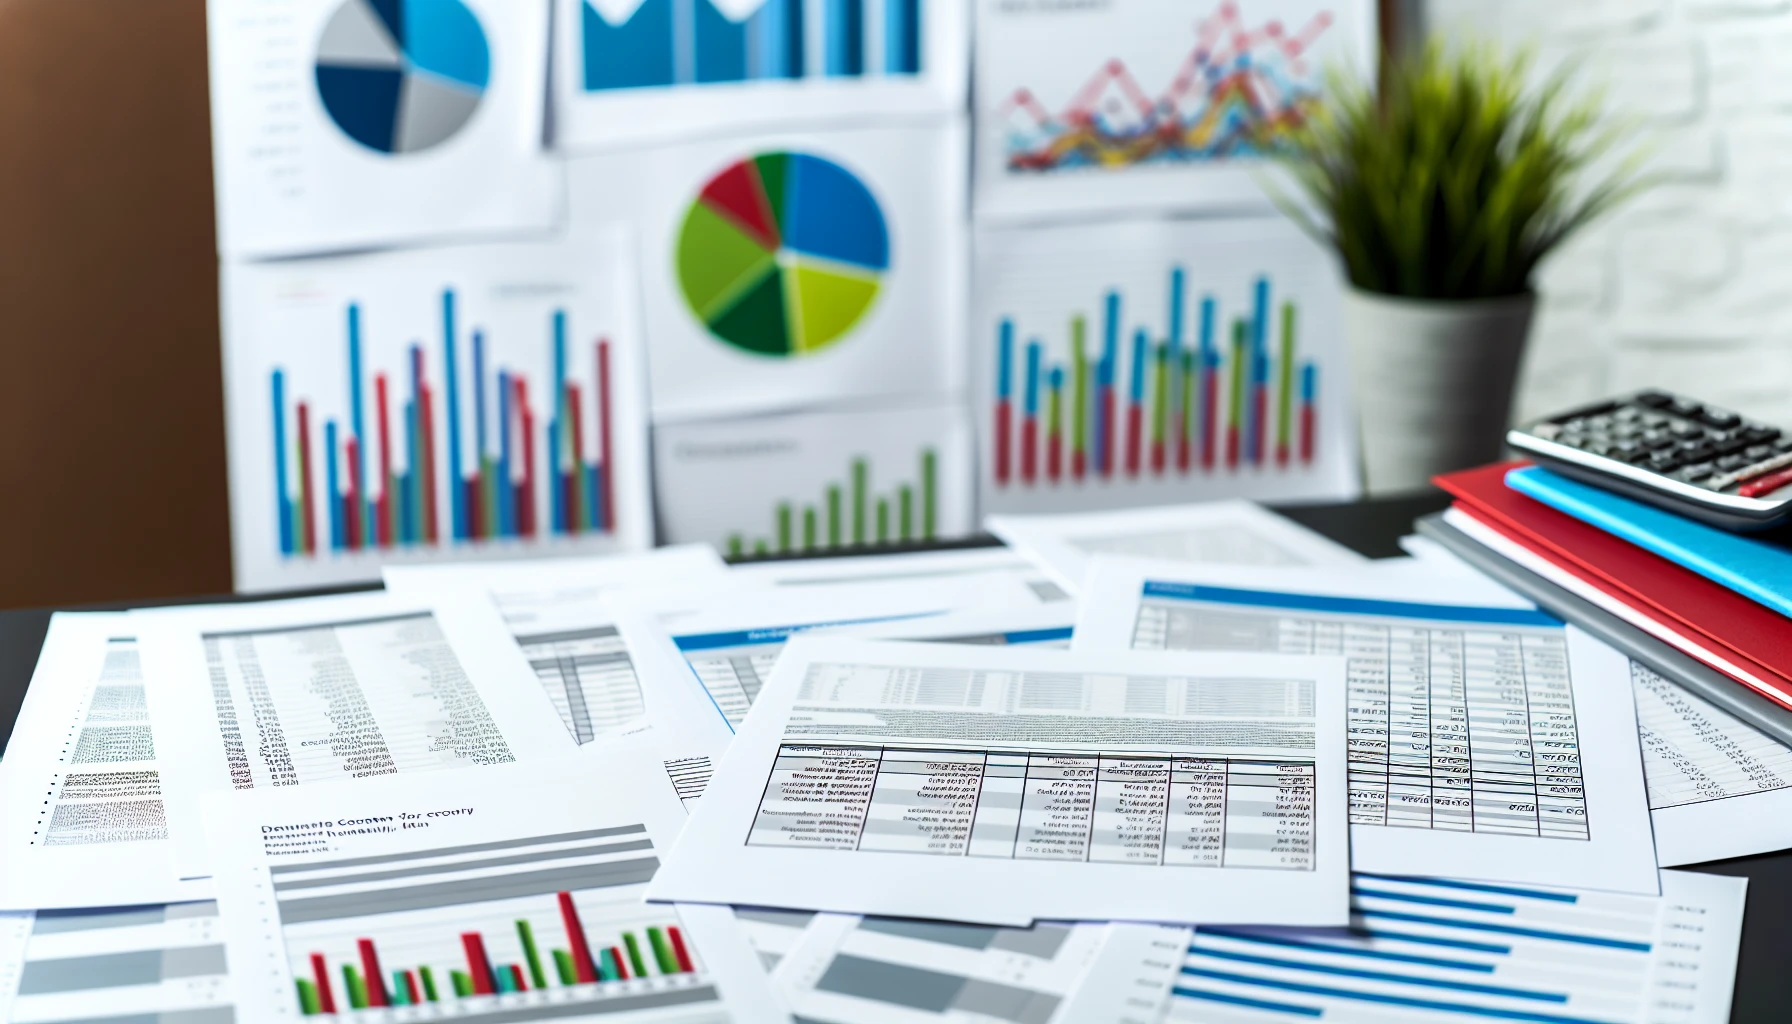 Financial reports and documents on a desk with charts and graphs